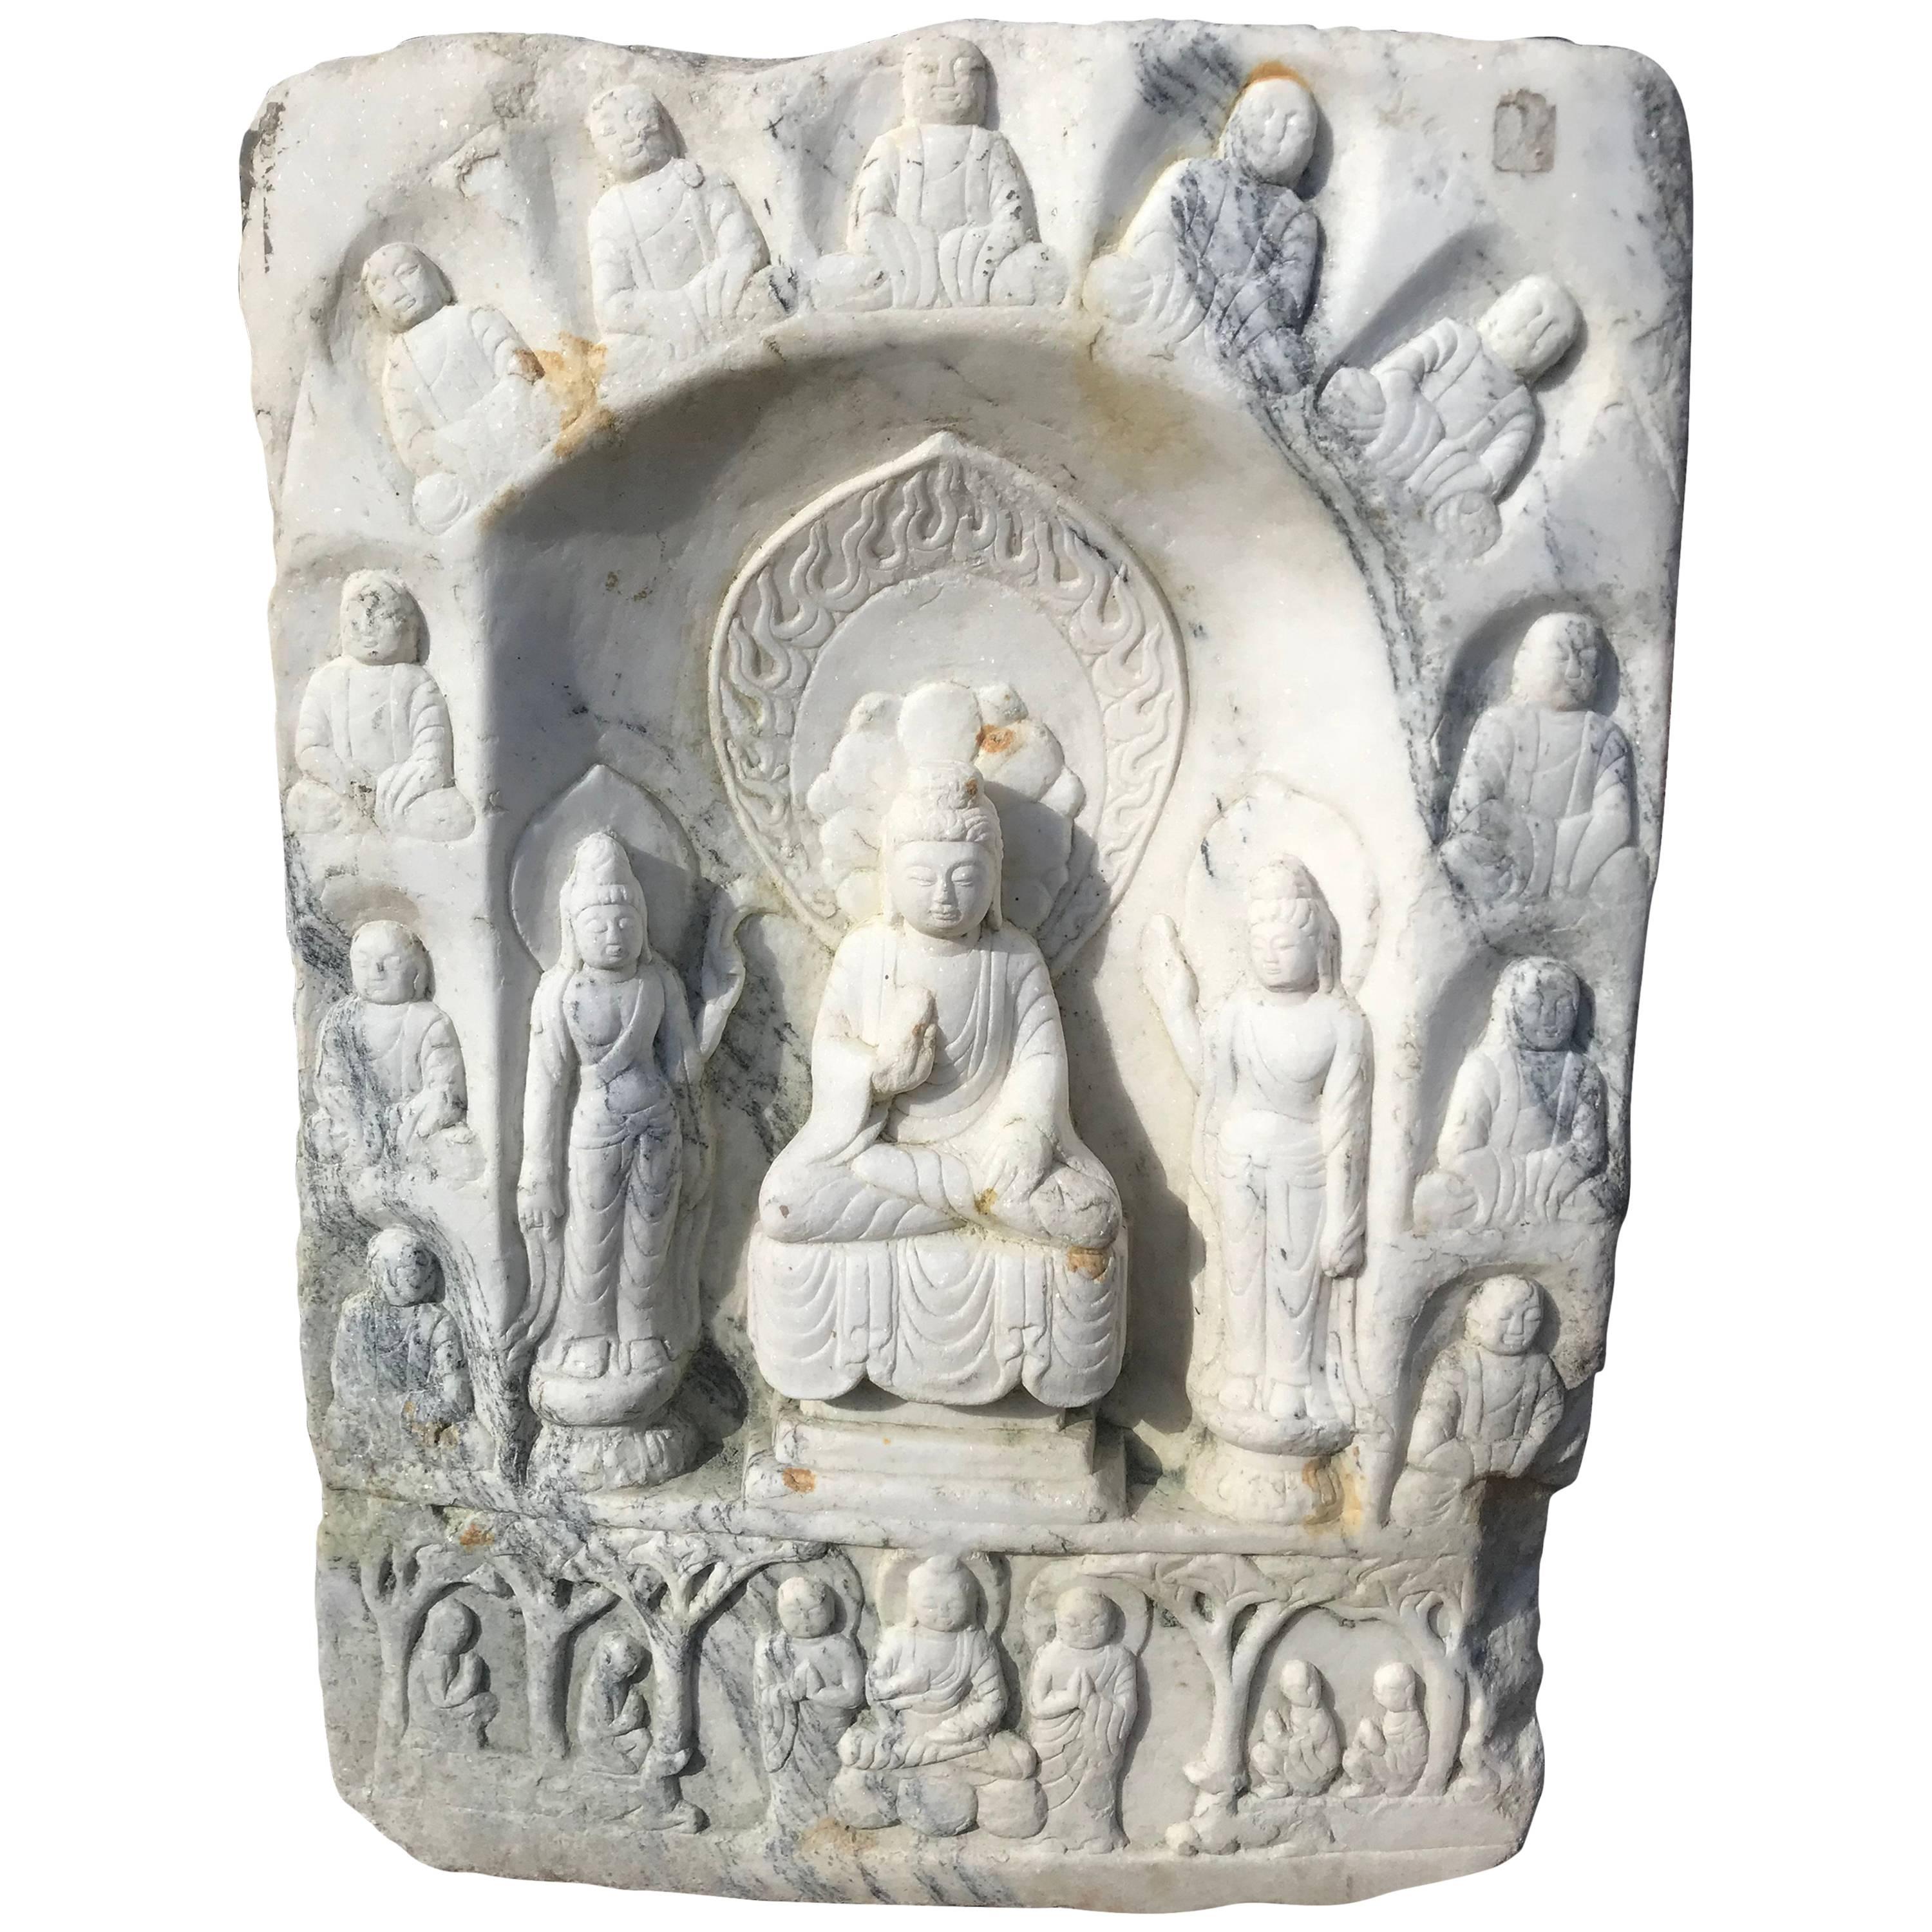 Chinese White Marble Garden Stone Buddha Guan Yin with Attendants Hand-Carved